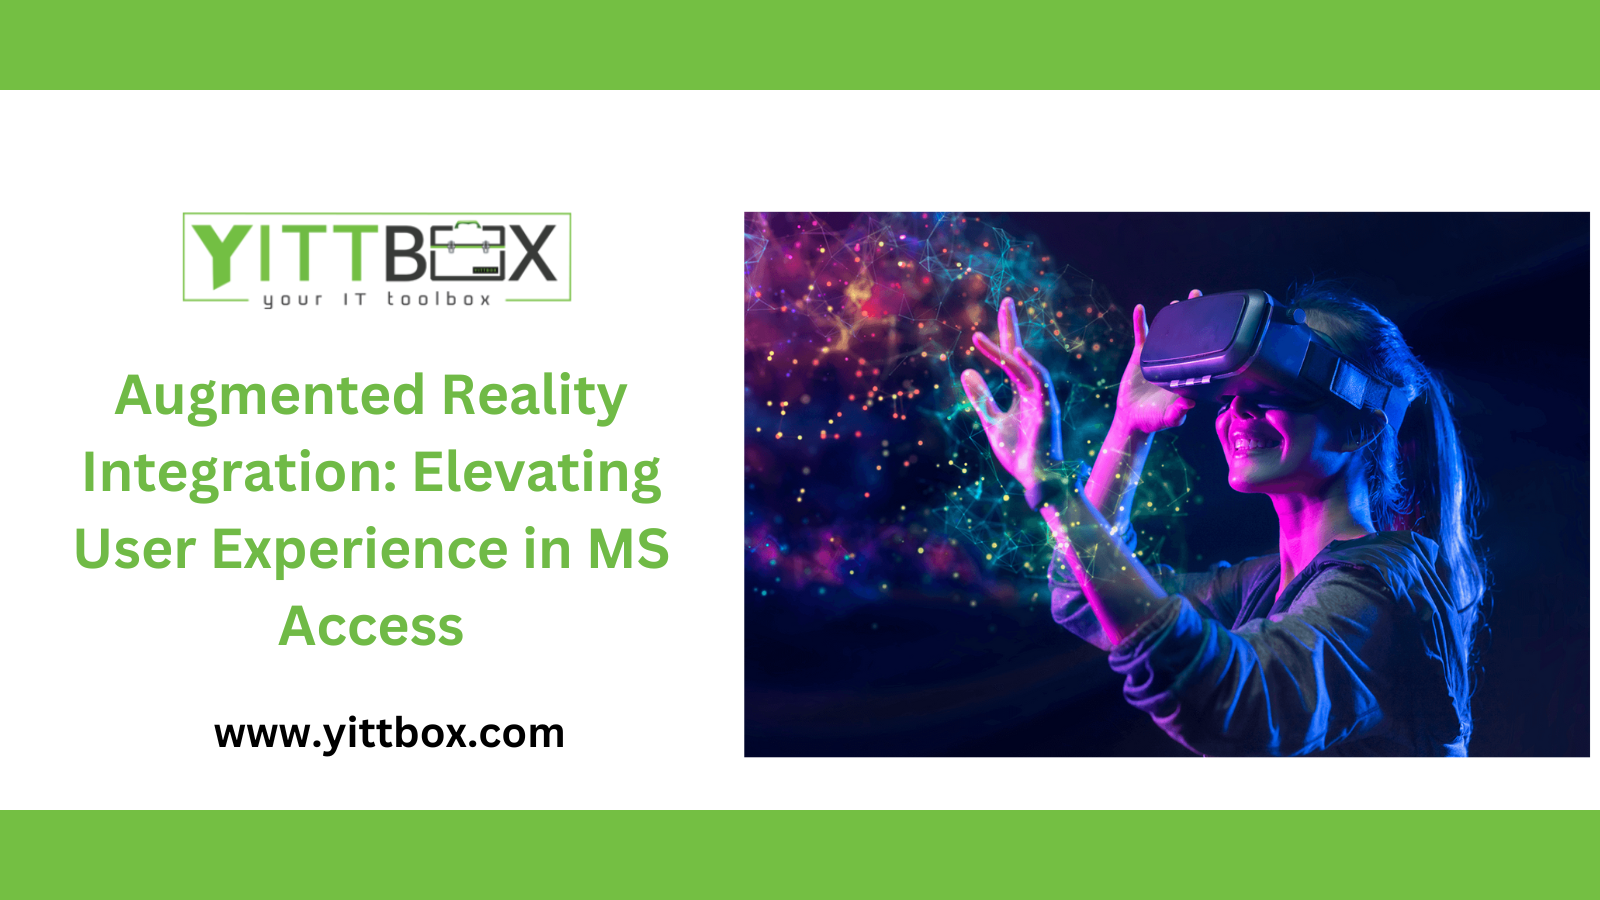 Augmented Reality Integration: Elevating User Experience in MS Access